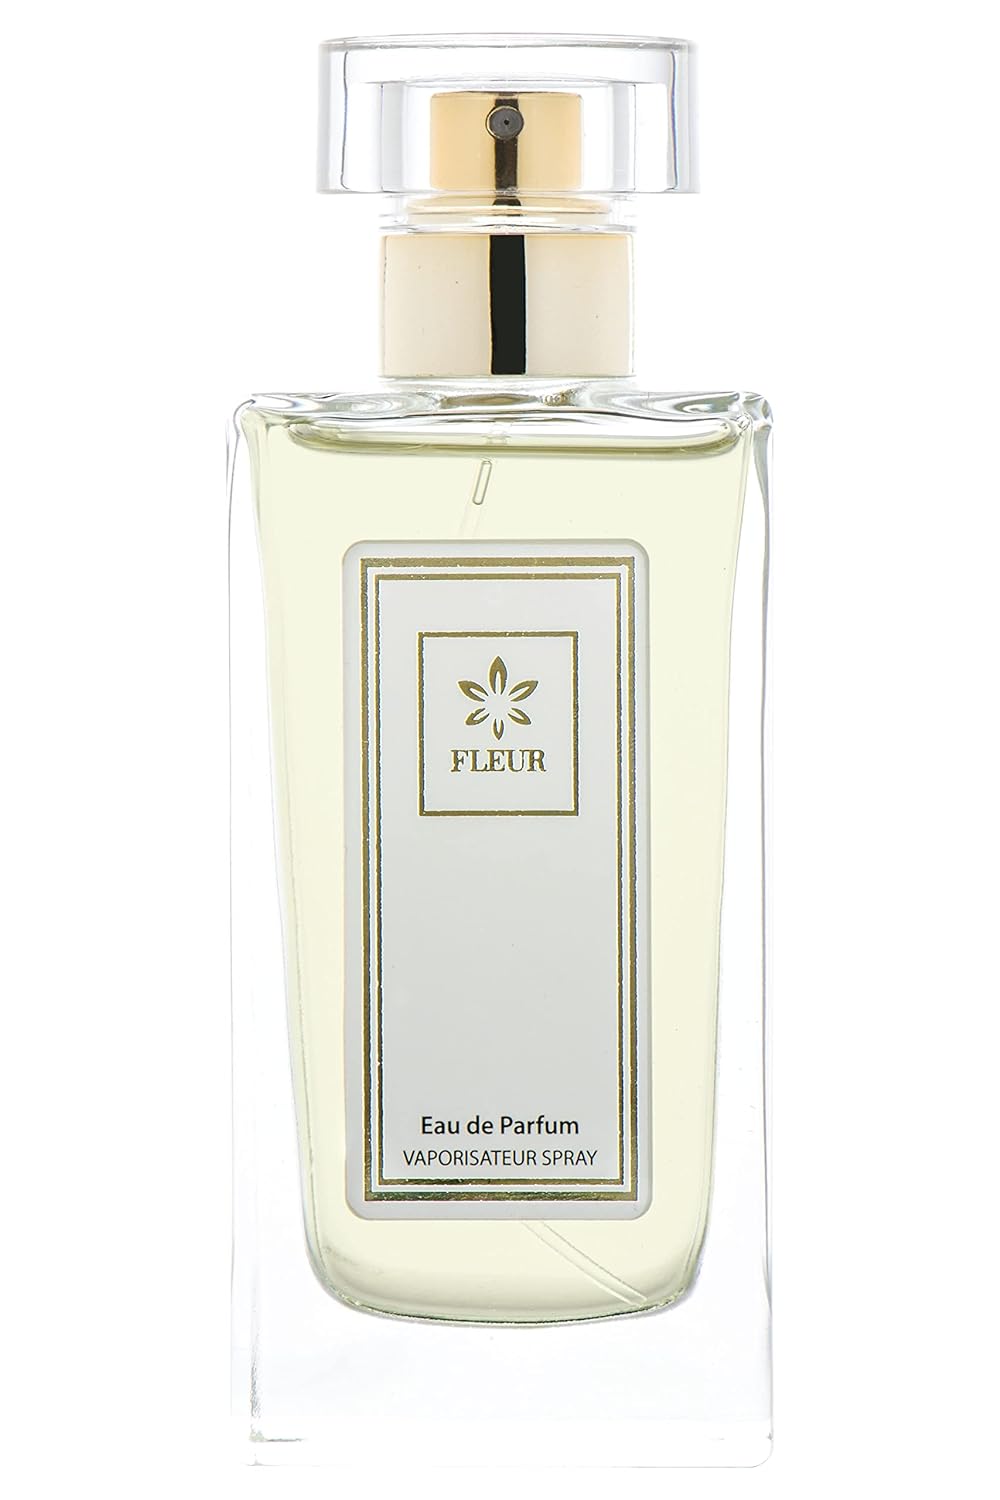 Fleur no 1034 Inspired by Louou Parfum-Dupes, Women \ 's fragrance twins, Edp fragrance spray 50 ml